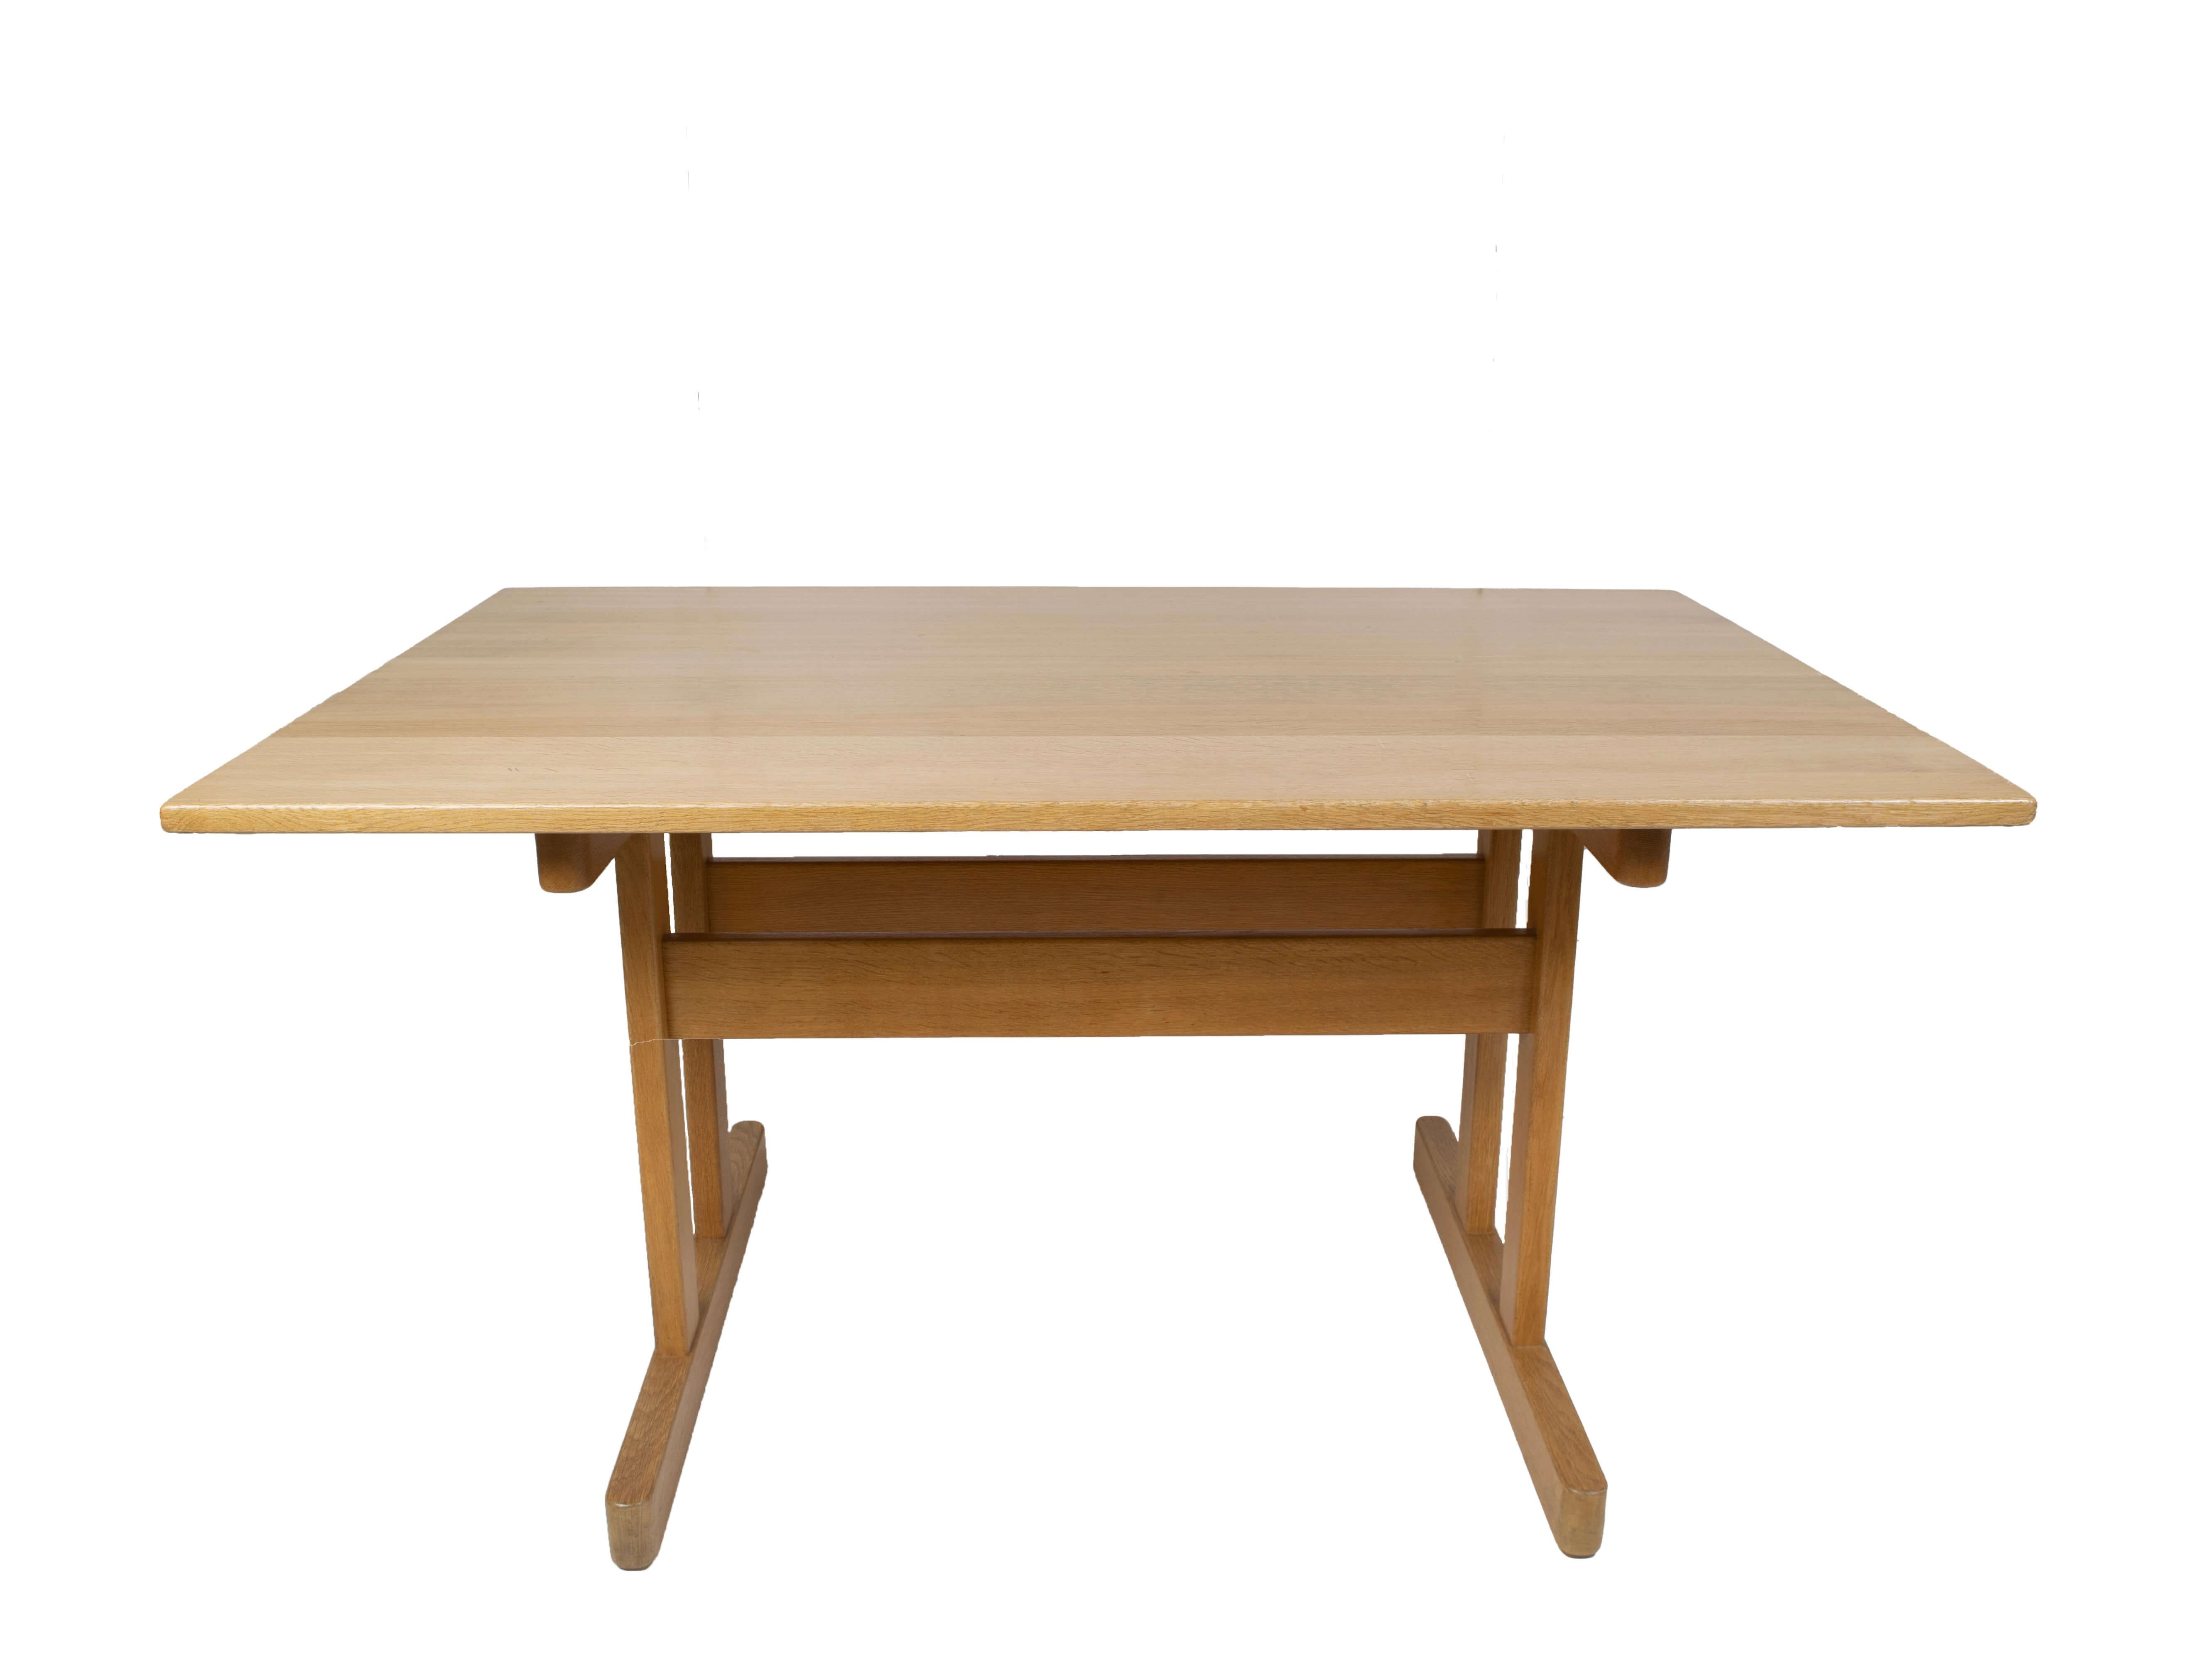 Oak dining table by Kurt Østervig for KP Møbler, Denmark 1976. This table has one extension element of 50 cm. It has the characteristic features of the shaker movement and is recognized for its table leg. This Scandinavian design is minimalistic and